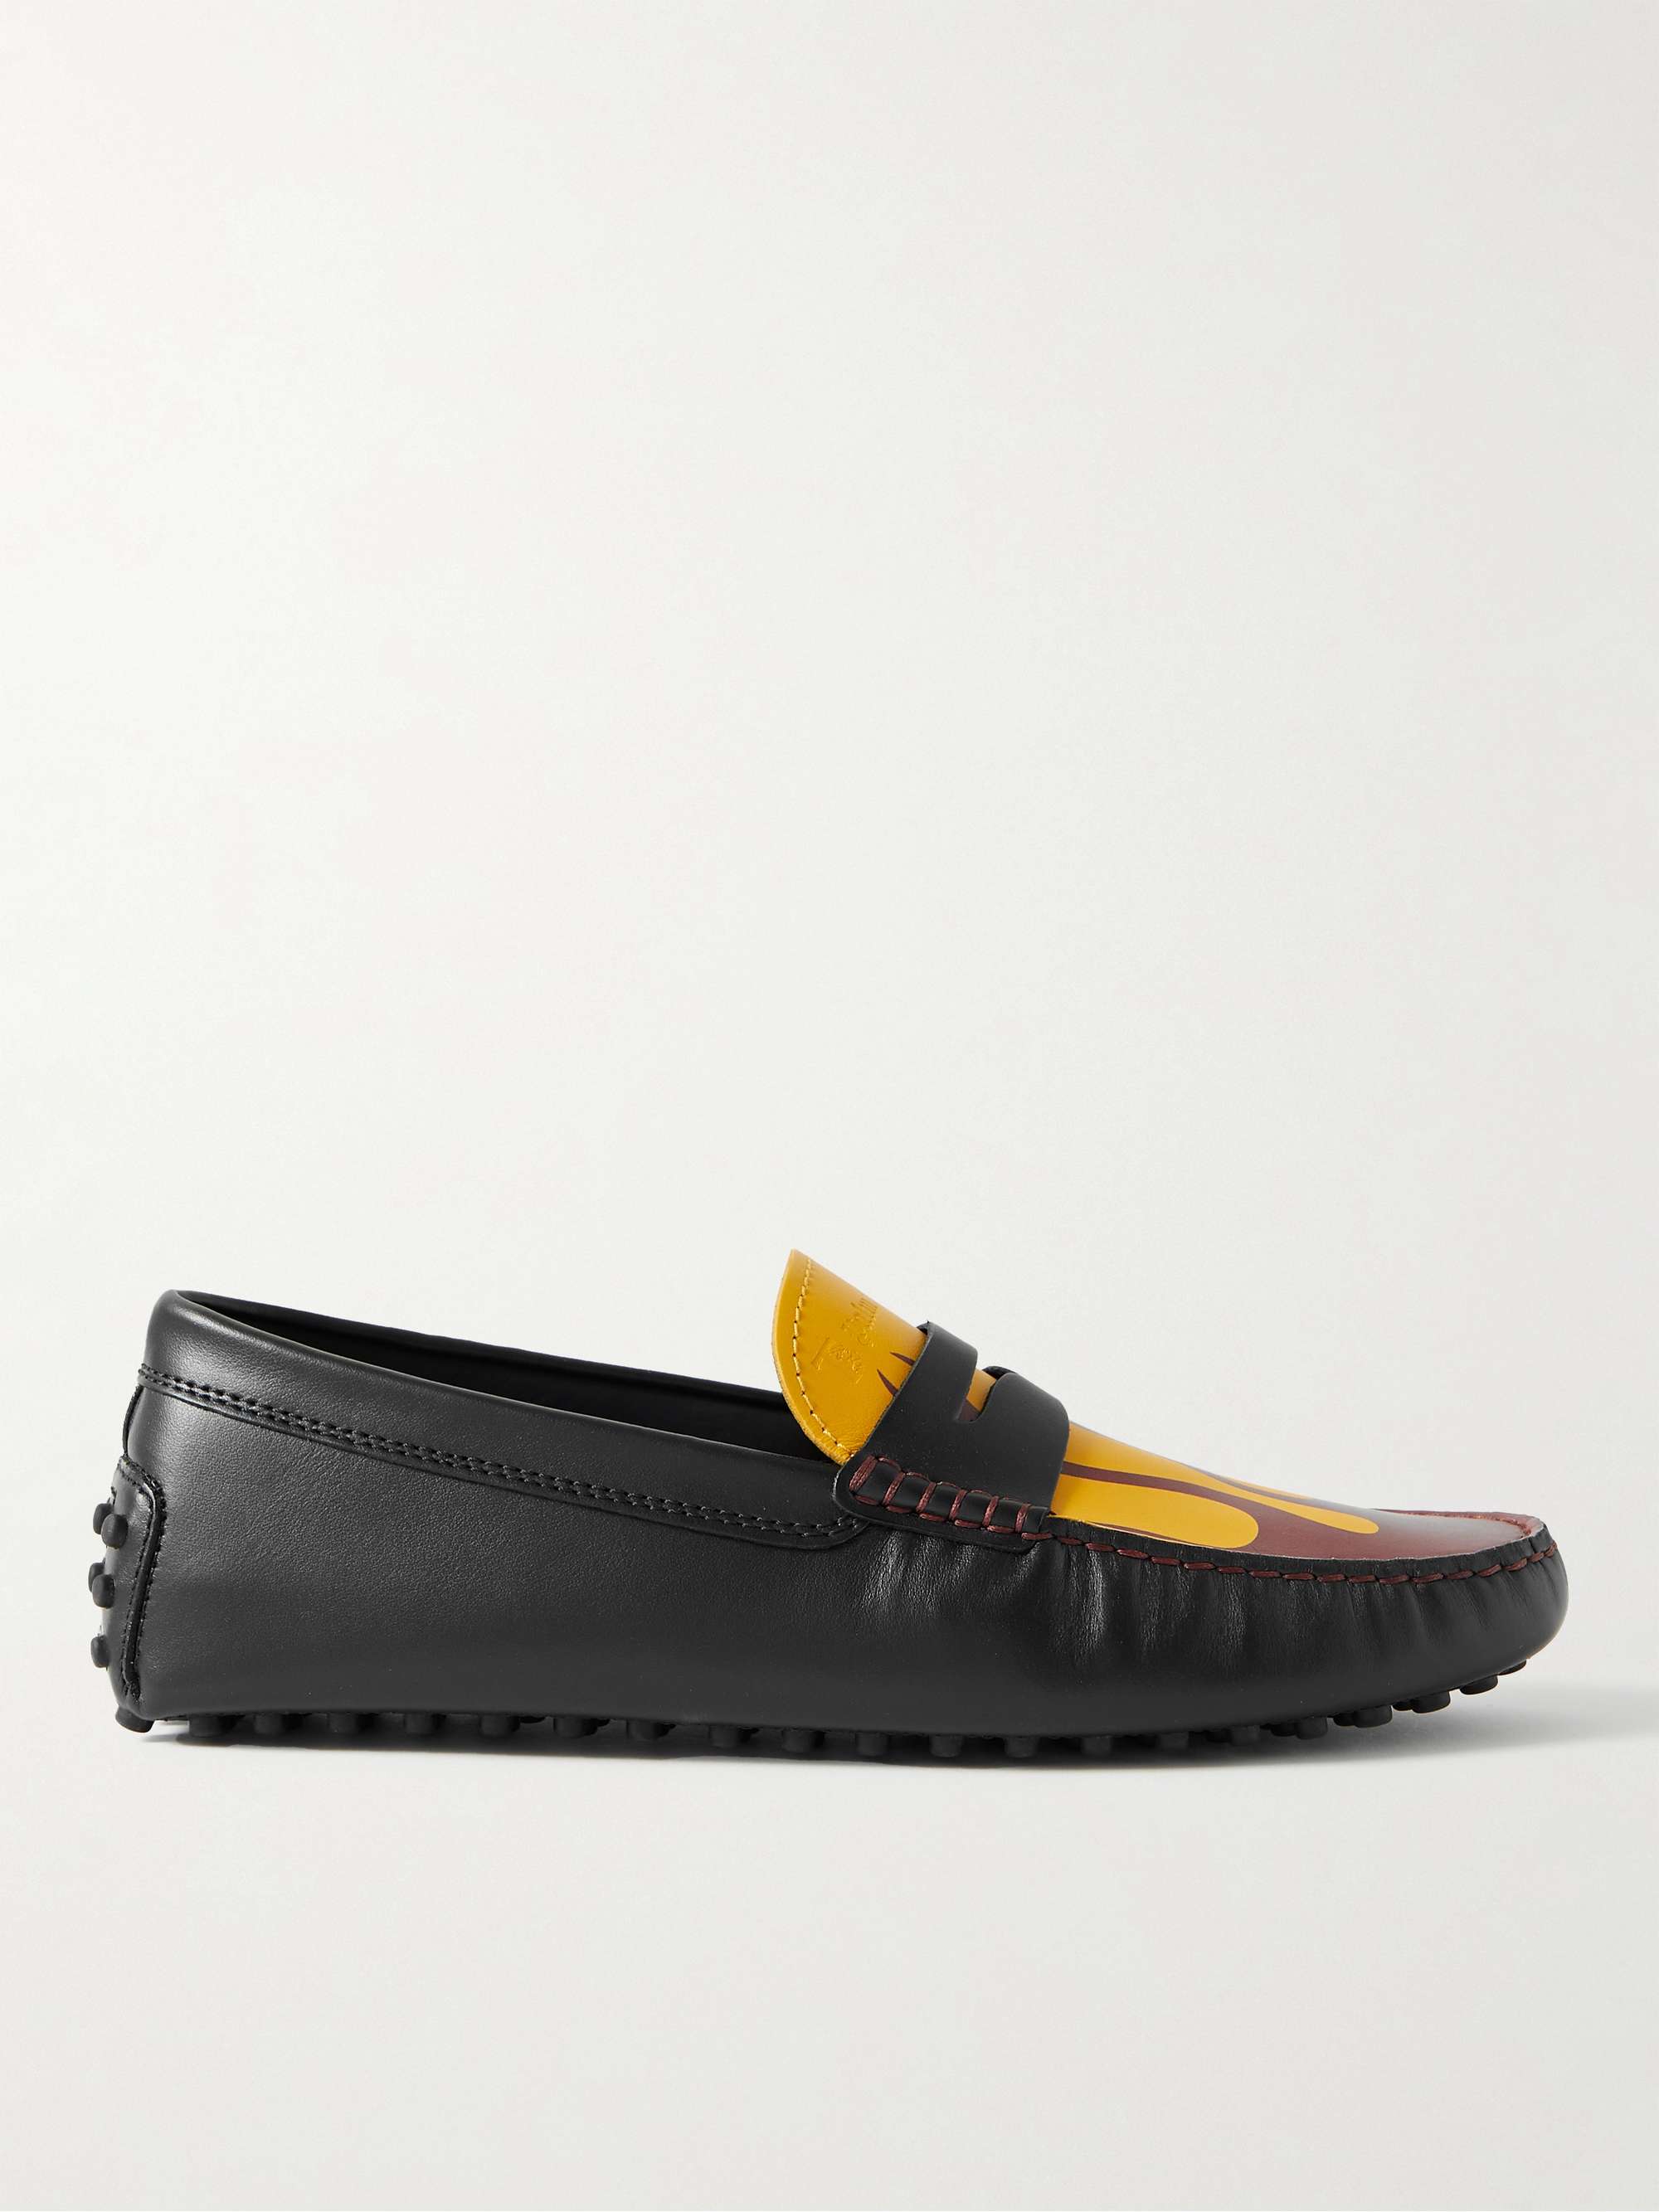 MONCLER GENIUS + Palm Angels + Tod's Gommino Printed Leather Driving Shoes